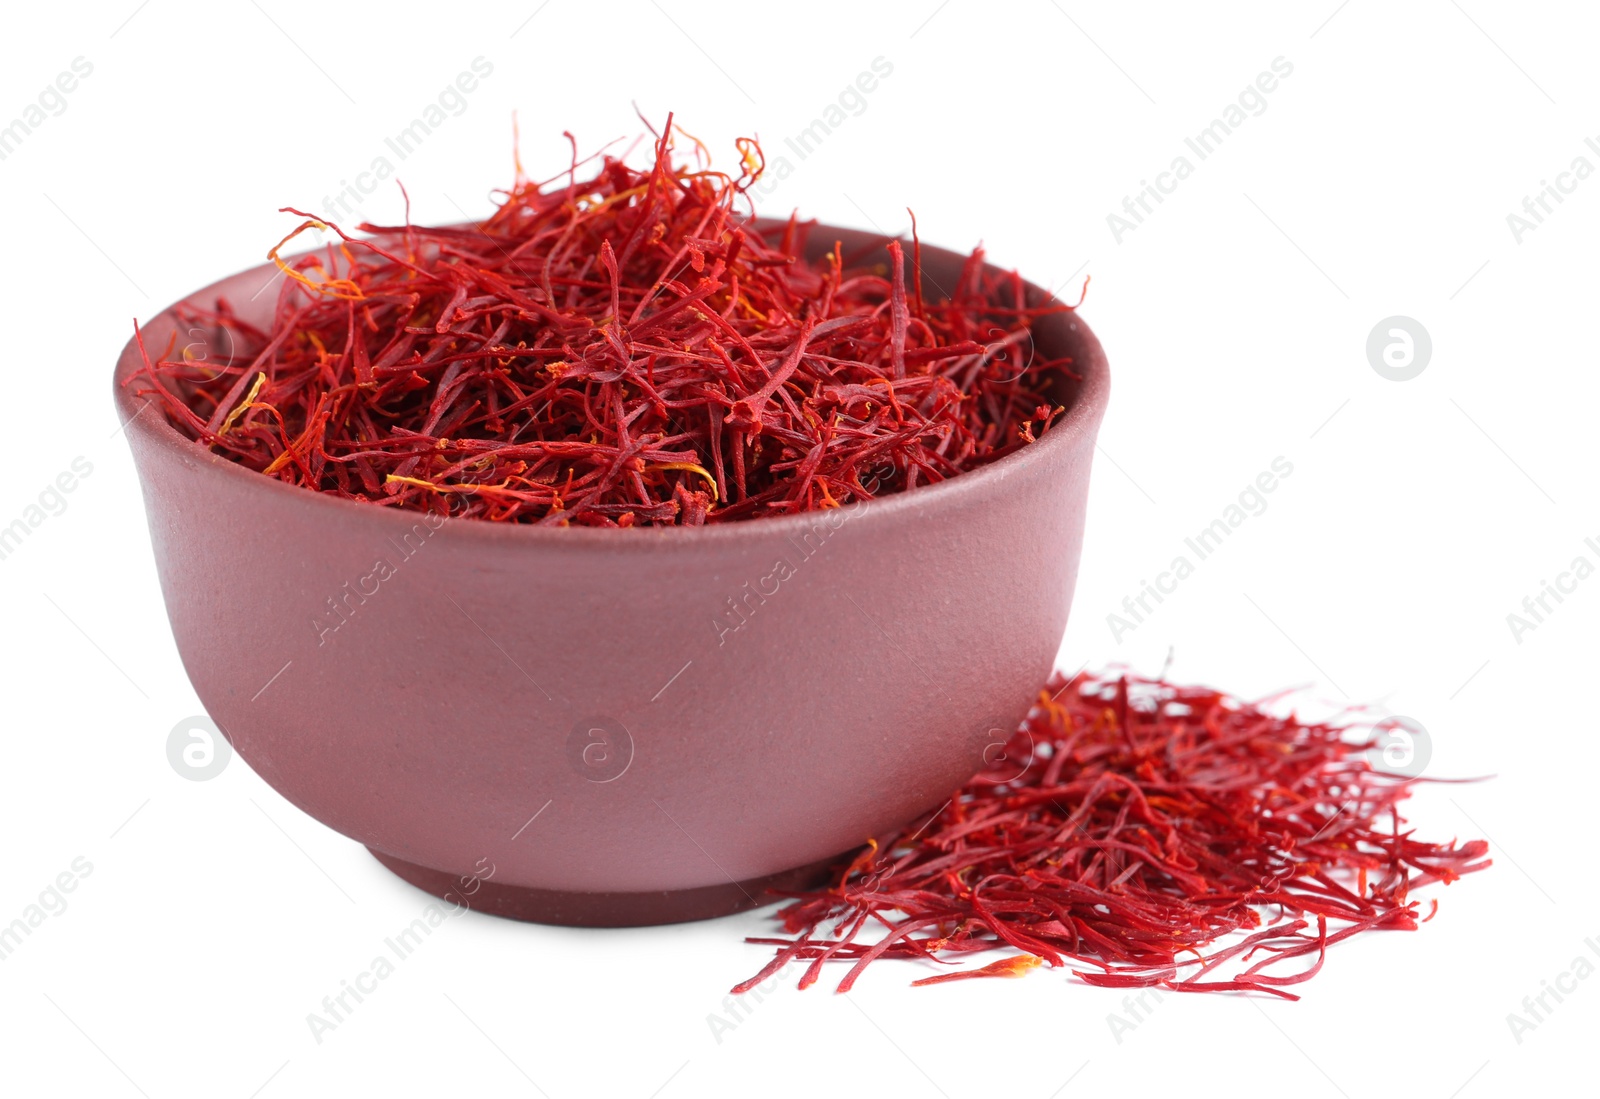 Photo of Dried saffron and bowl on white background